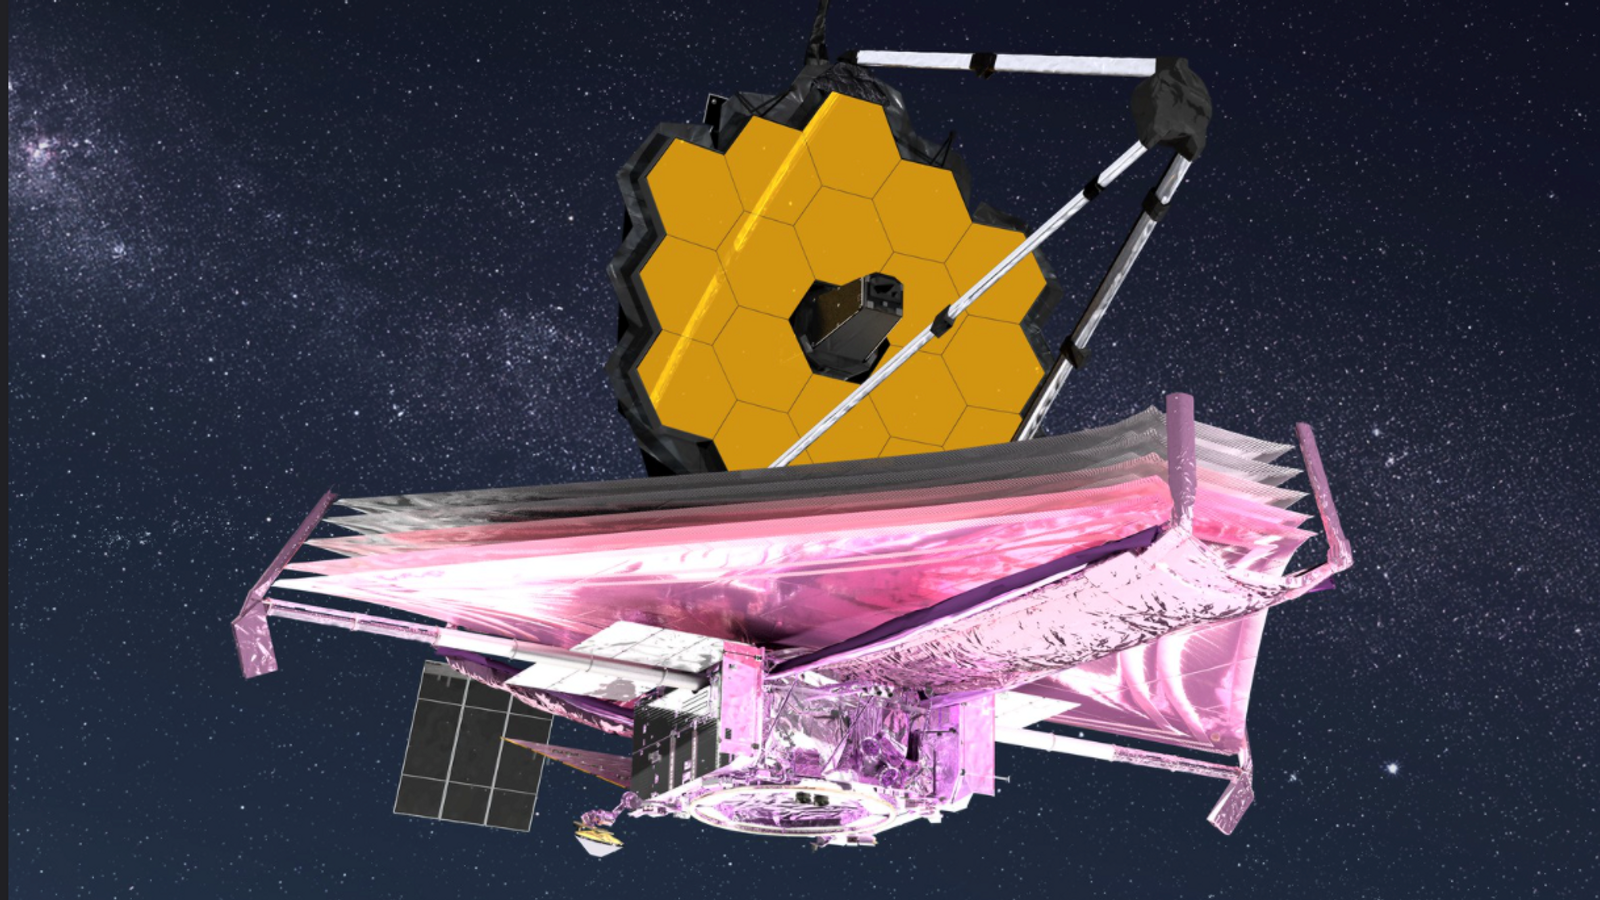 When Will the James Webb Telescope be Operational in 2022?